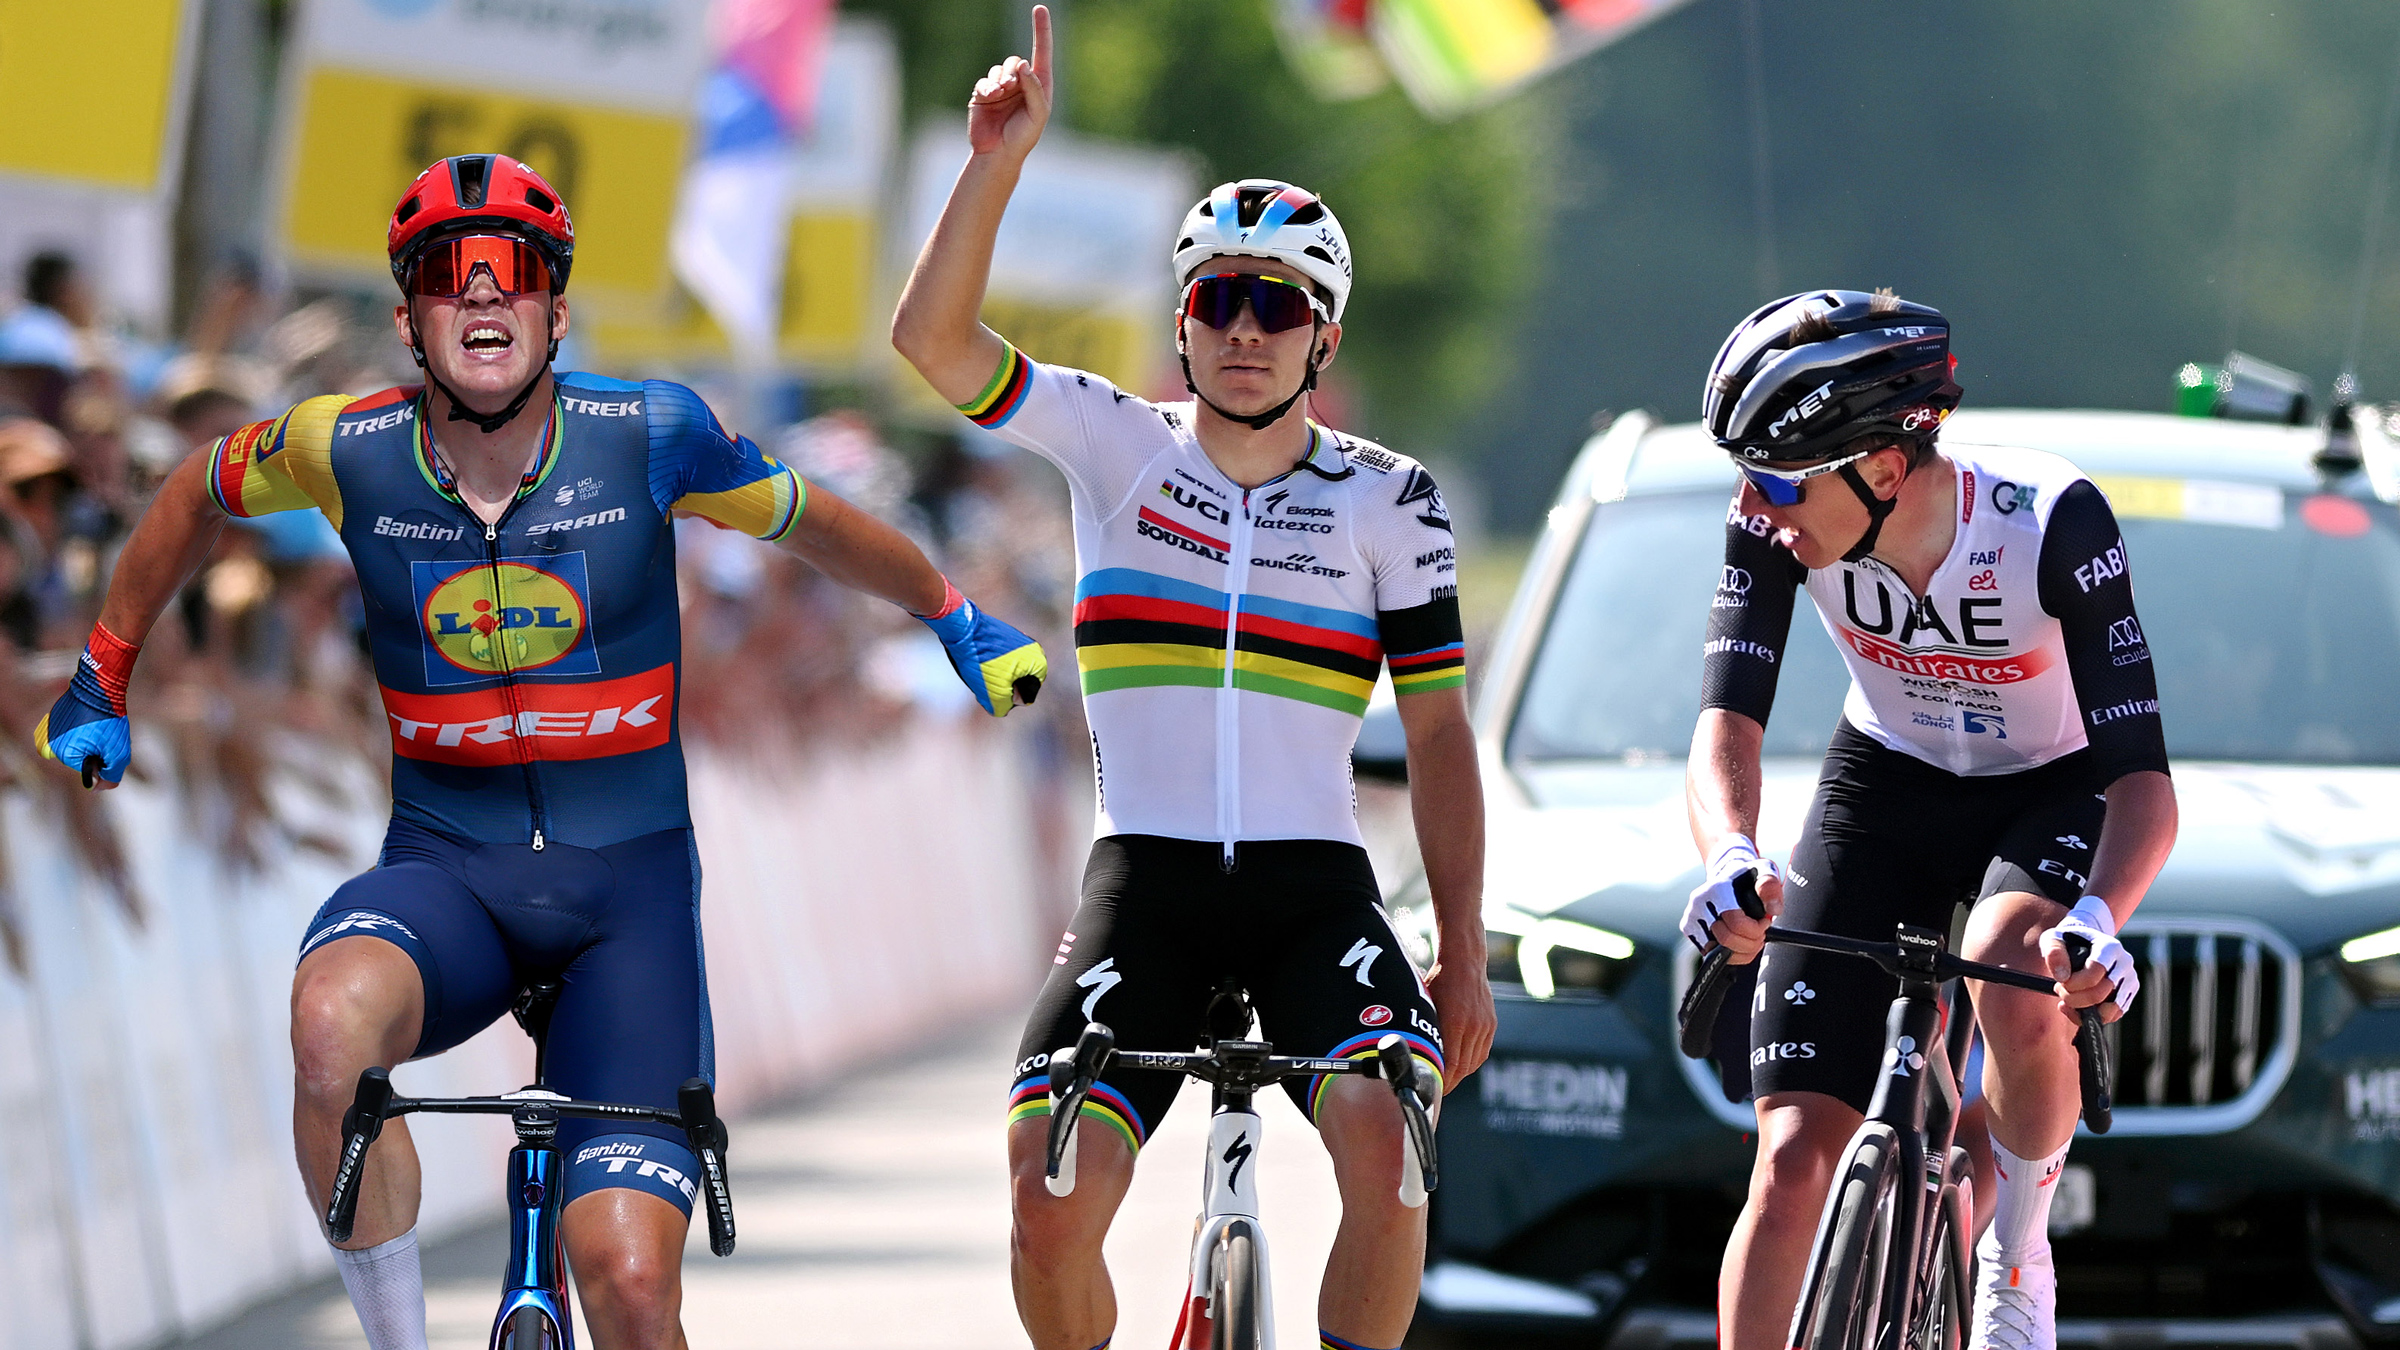 2023 UCI Road World Championships favourites Riders to watch in elite